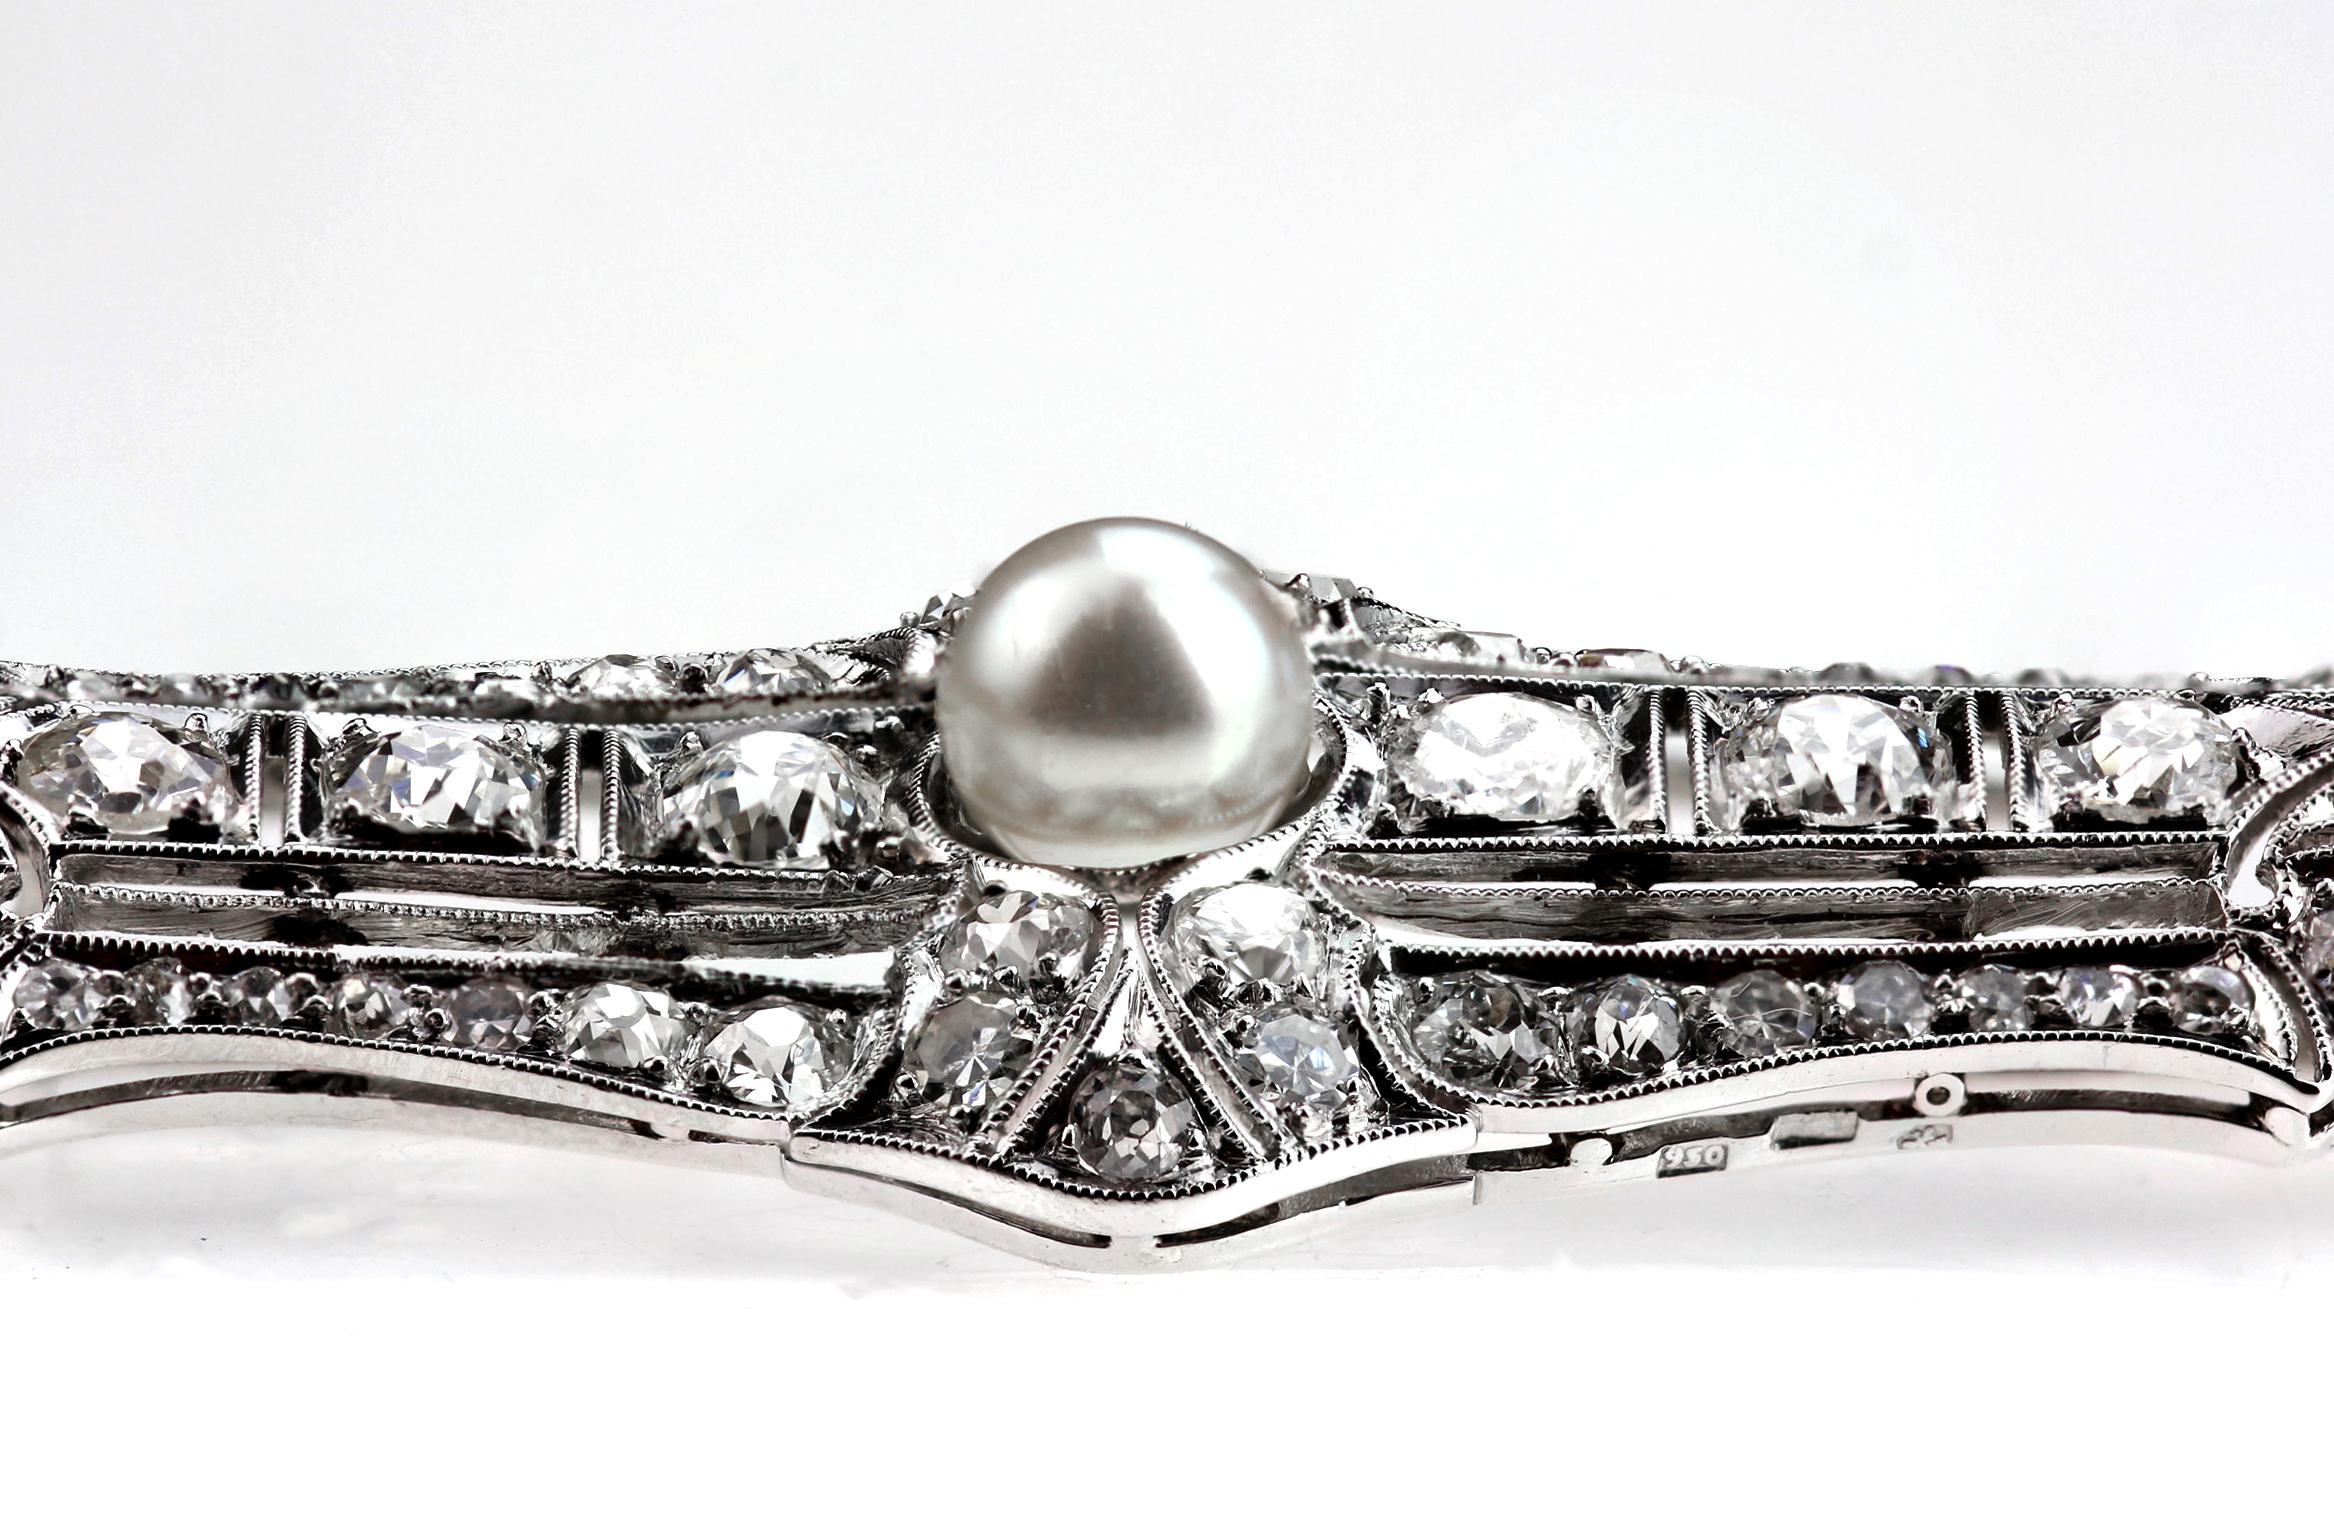 Antique, Edwardian brooch set with diamonds pearls. 
60 x Old European cut diamond 2.60 carats, assessed colour H/I, assessed clarity VS/SI
1 x Pearl, measurement 6.1 x 6.1 mm 